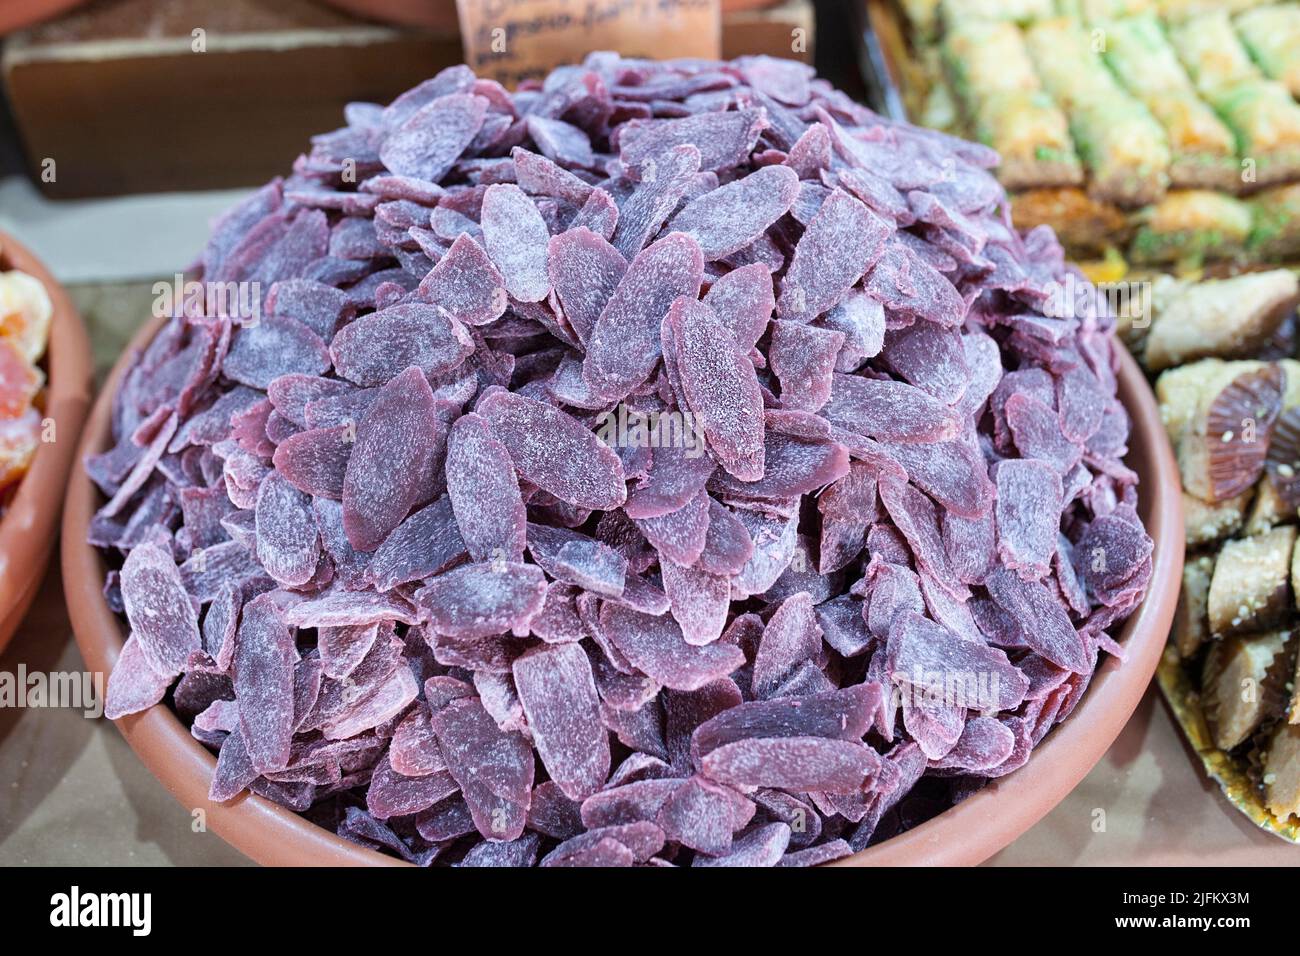 Dehydrated purple pineapple. Slices displayed at street market stall. Stock Photo